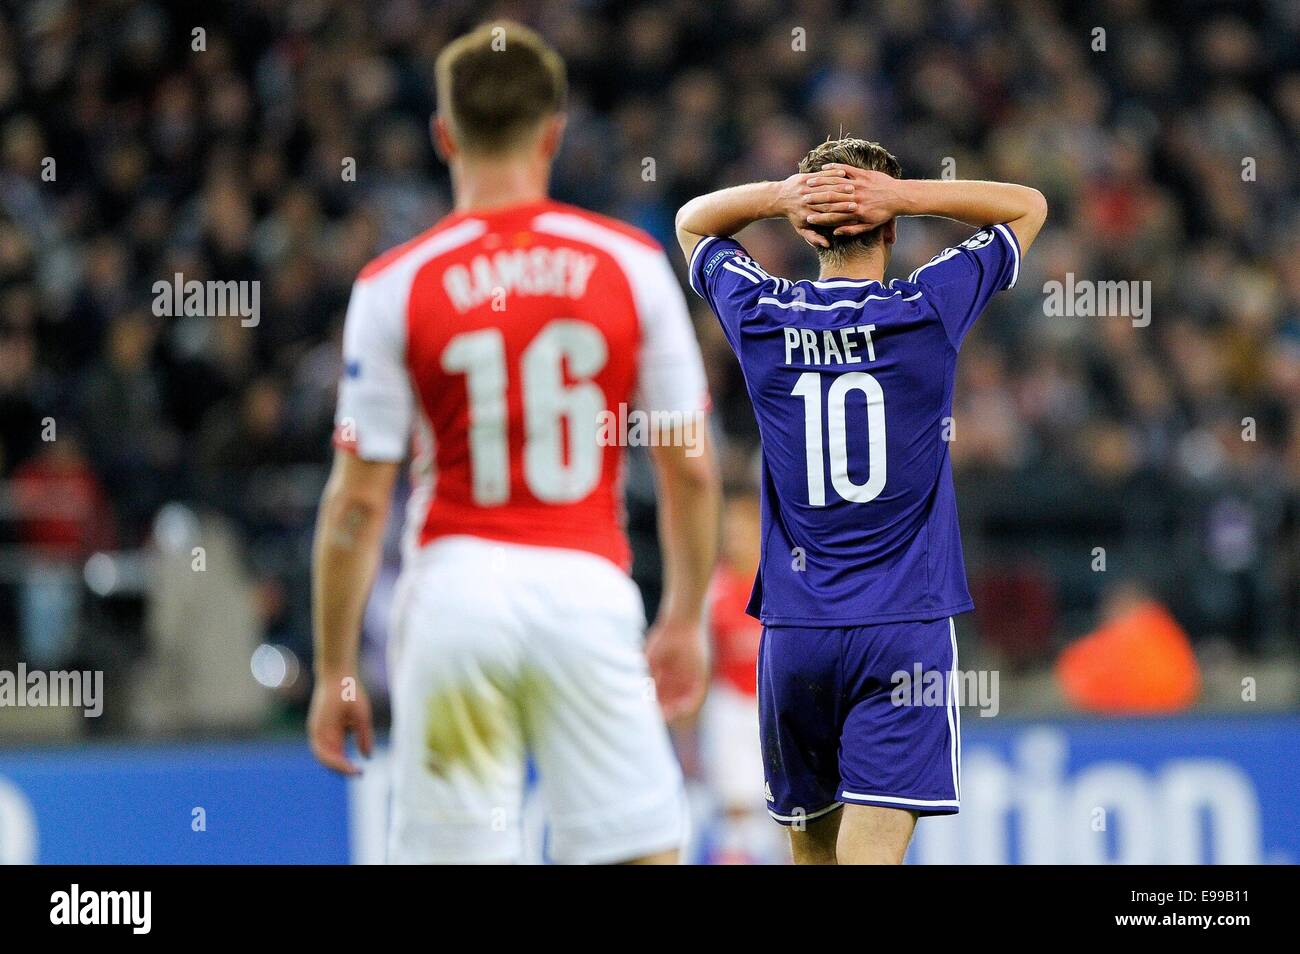 Anderlecht, Belgium. 22nd Oct, 2014. UEFA Champions League football. Anderlecht versus Arsenal. dennis praet cannot believe they have let the game slip away Credit:  Action Plus Sports/Alamy Live News Stock Photo